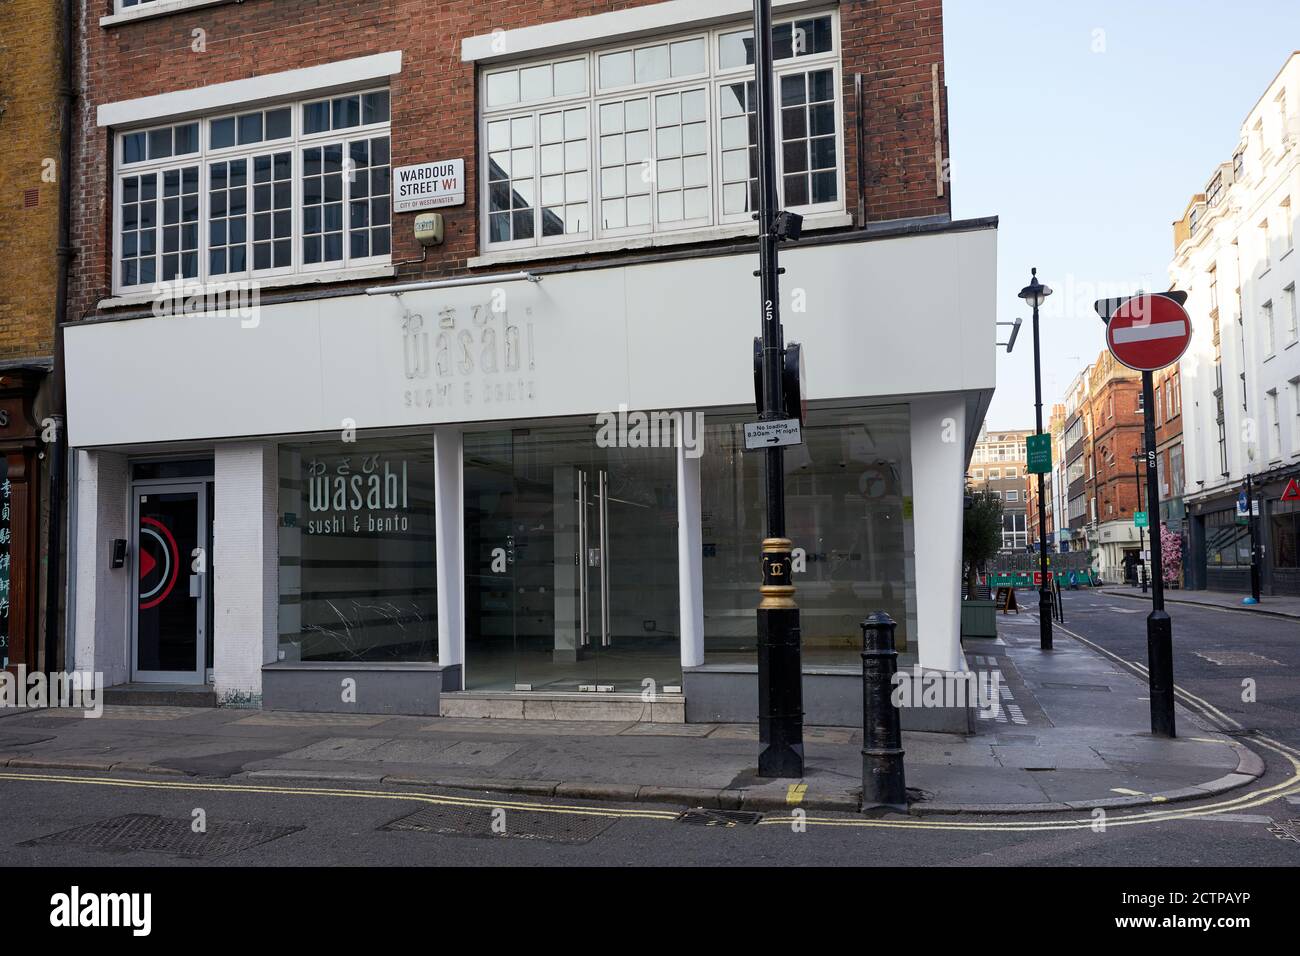 London, UK. - 22 Sept 2020: The former Wardour Street branch of Wasabu in  Soho, now empty and cleared out of its fixtures and fittings. The sushi chain was forced to close a number of stores after sales were hit by the coronavirus pandemic. Stock Photo